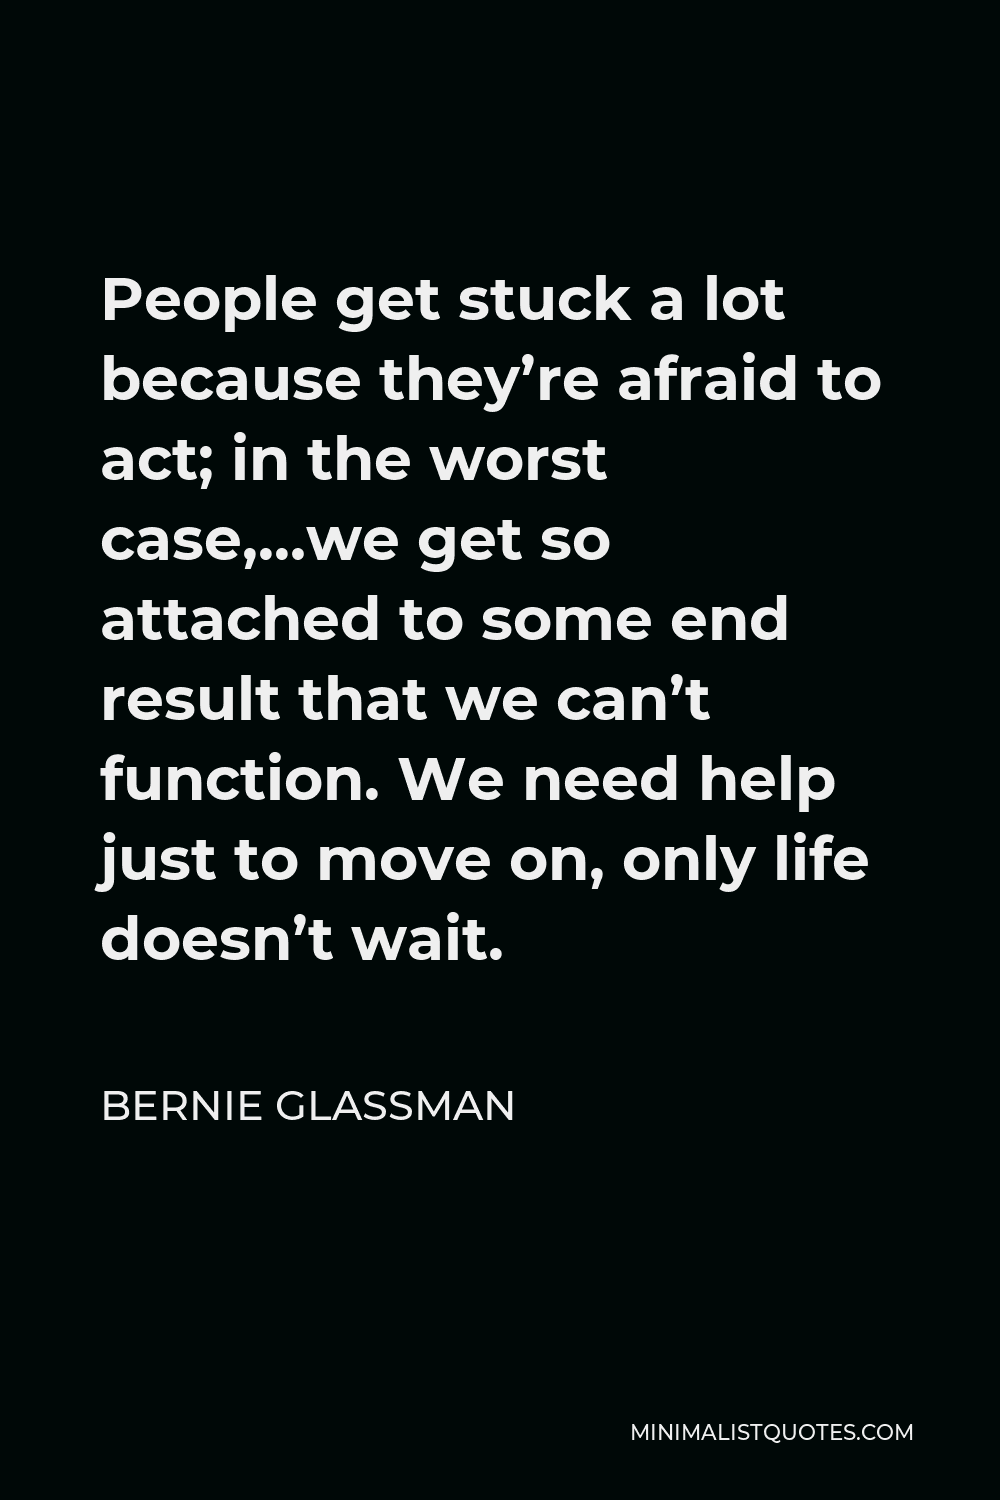 Bernie Glassman Quote - People get stuck a lot because they’re afraid to act; in the worst case,…we get so attached to some end result that we can’t function. We need help just to move on, only life doesn’t wait.